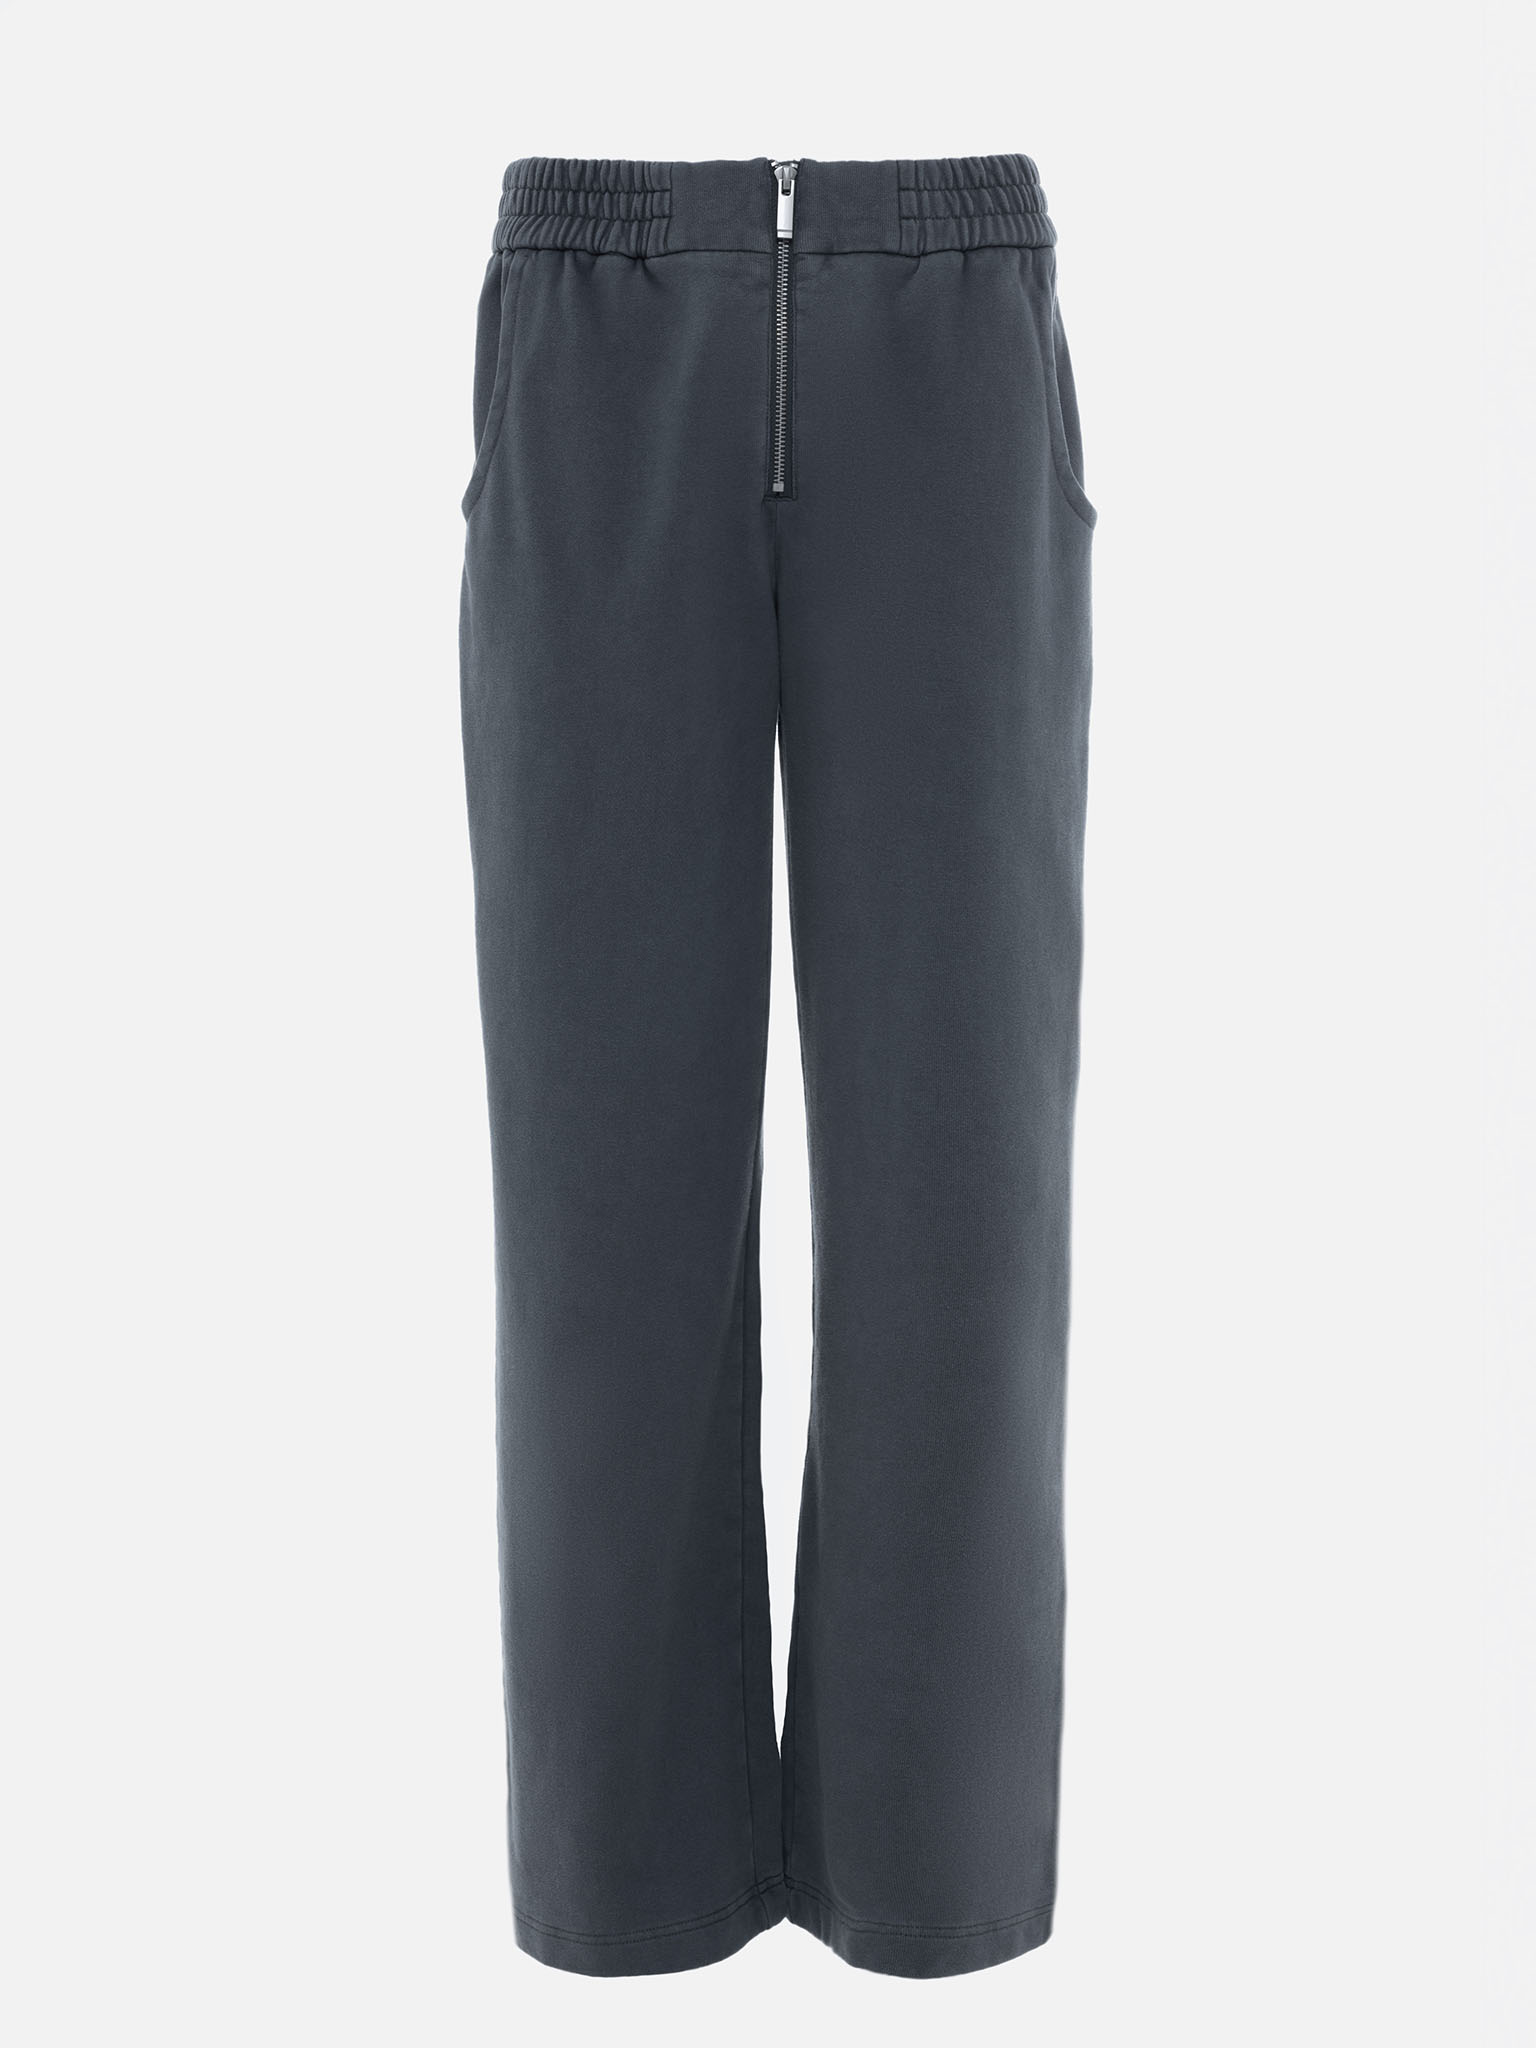 Loose sweatpants with a front zip :: LICHI - Online fashion store